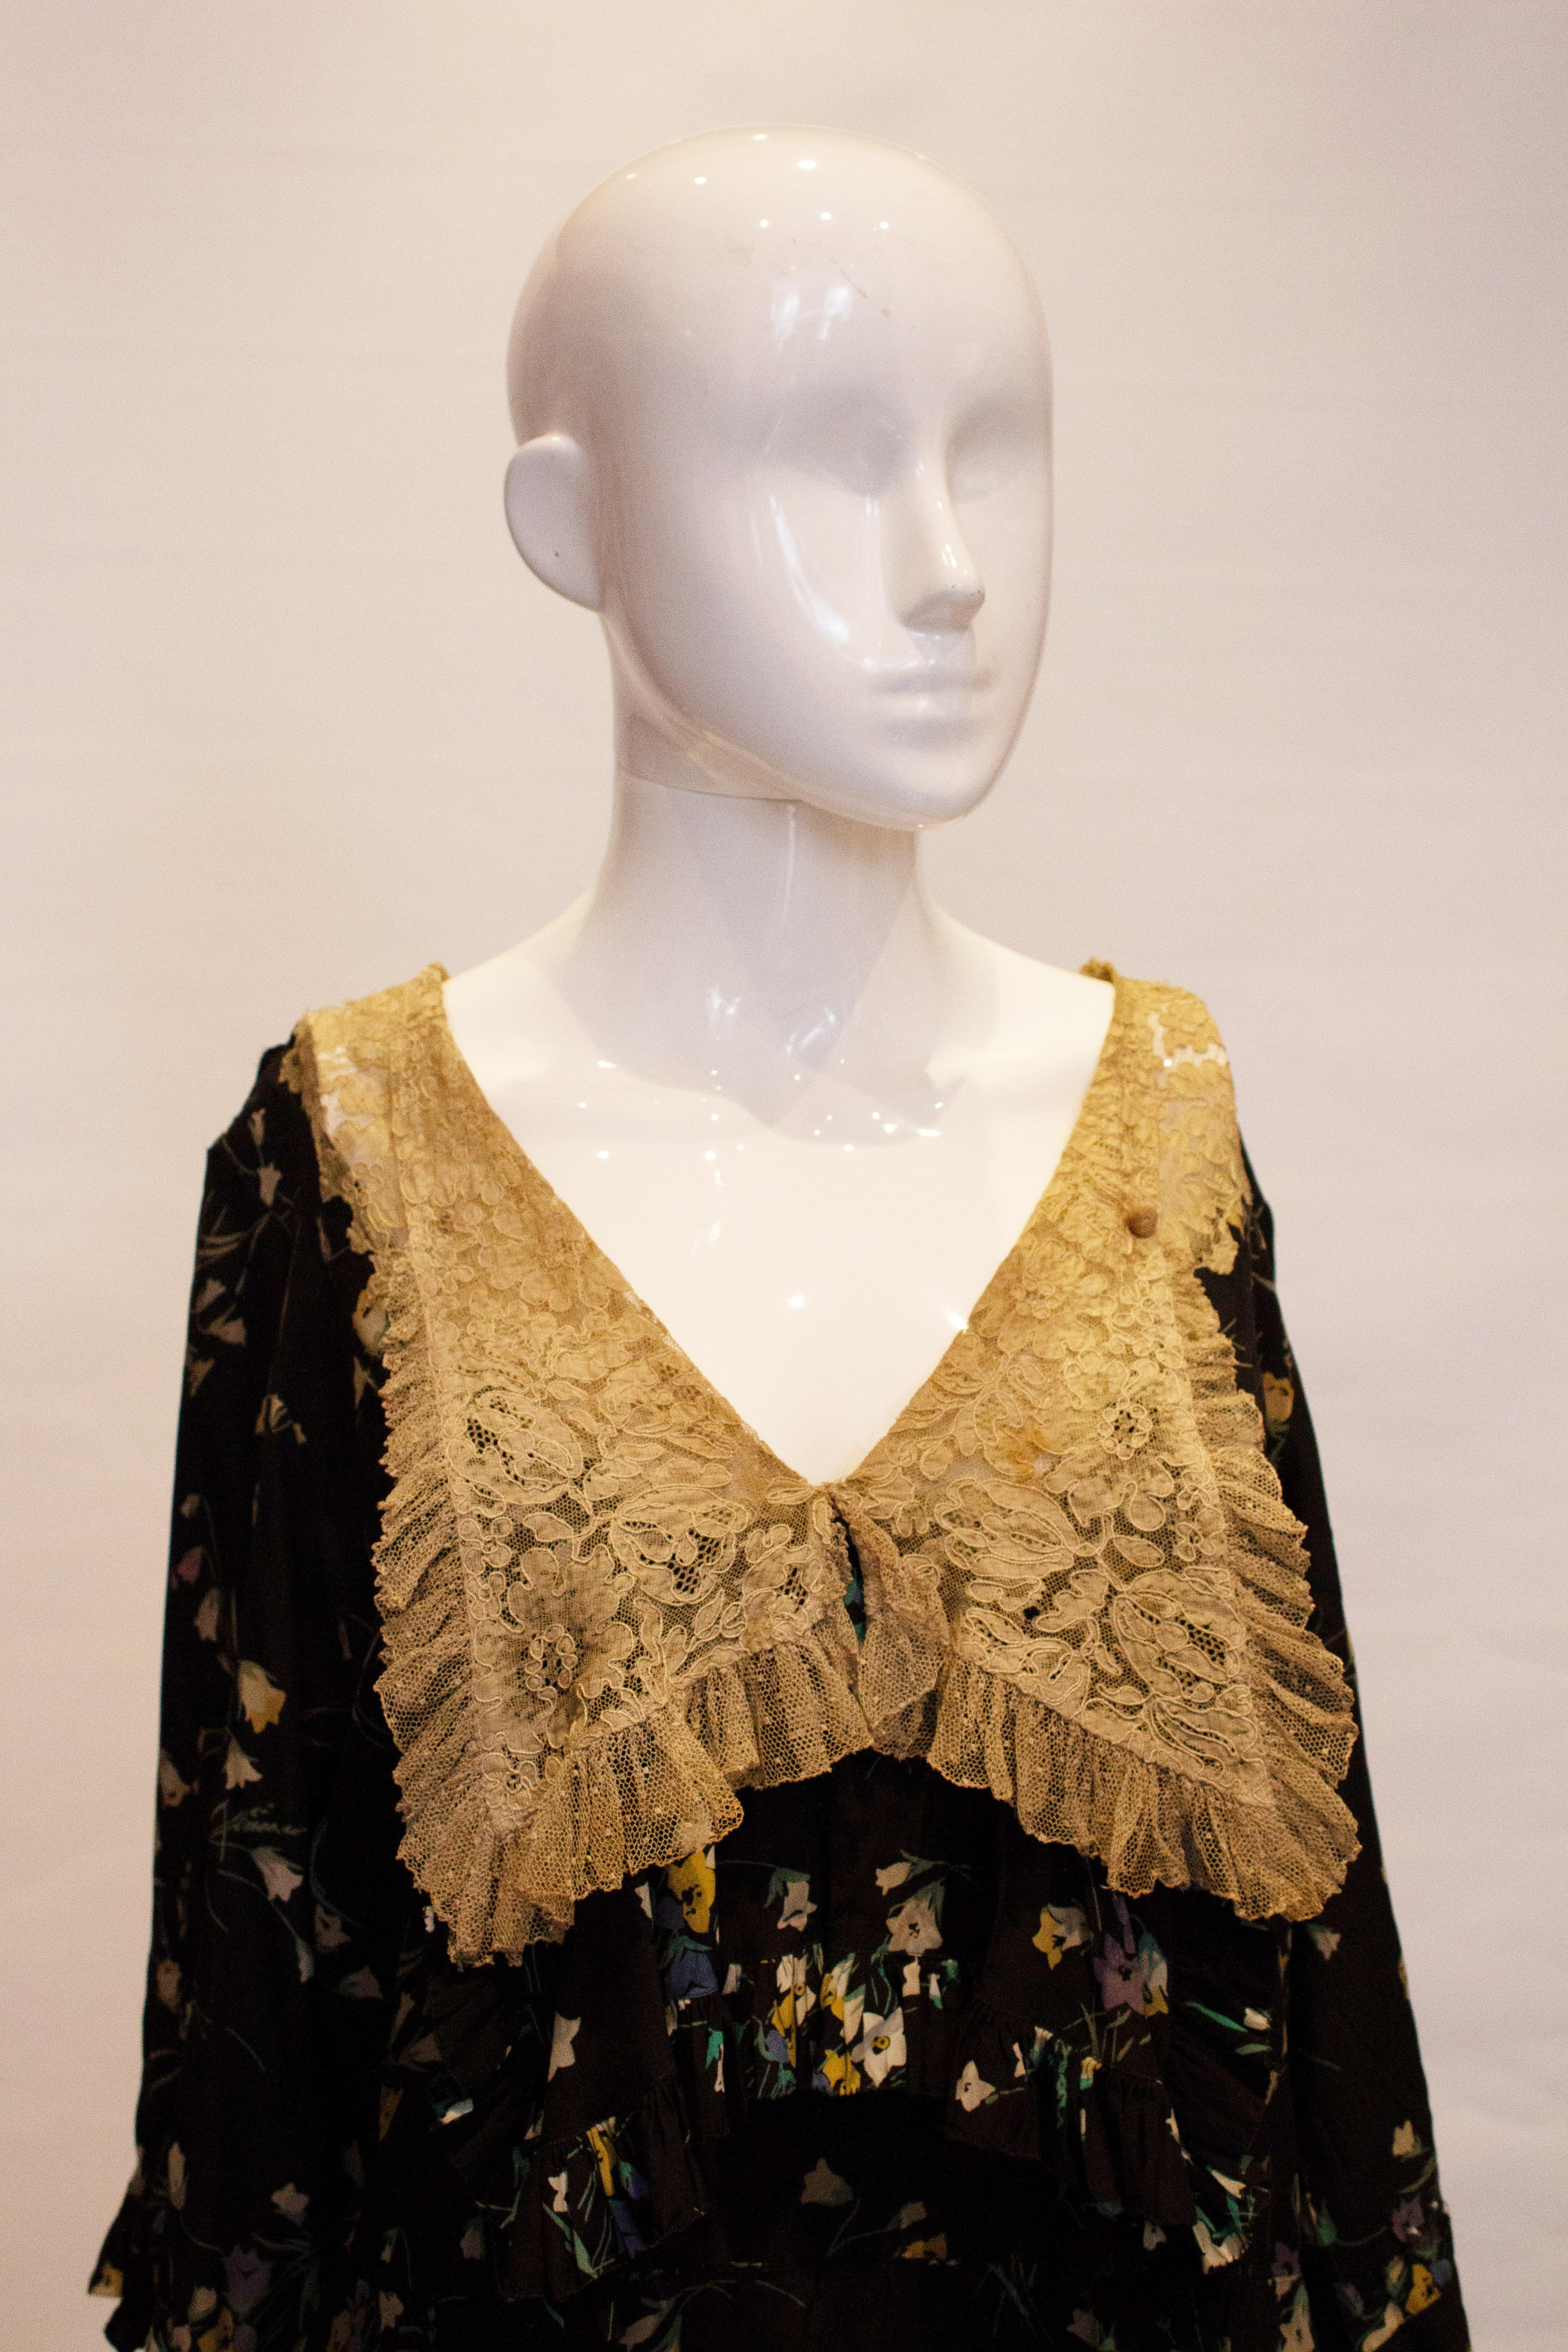 A head turning vintage silk dress from the 1920s. The dress has a black background with a floral print, with lace cuffs and frill arund the neckline. 
Measurements : Bust up to 40'',lenght 51''